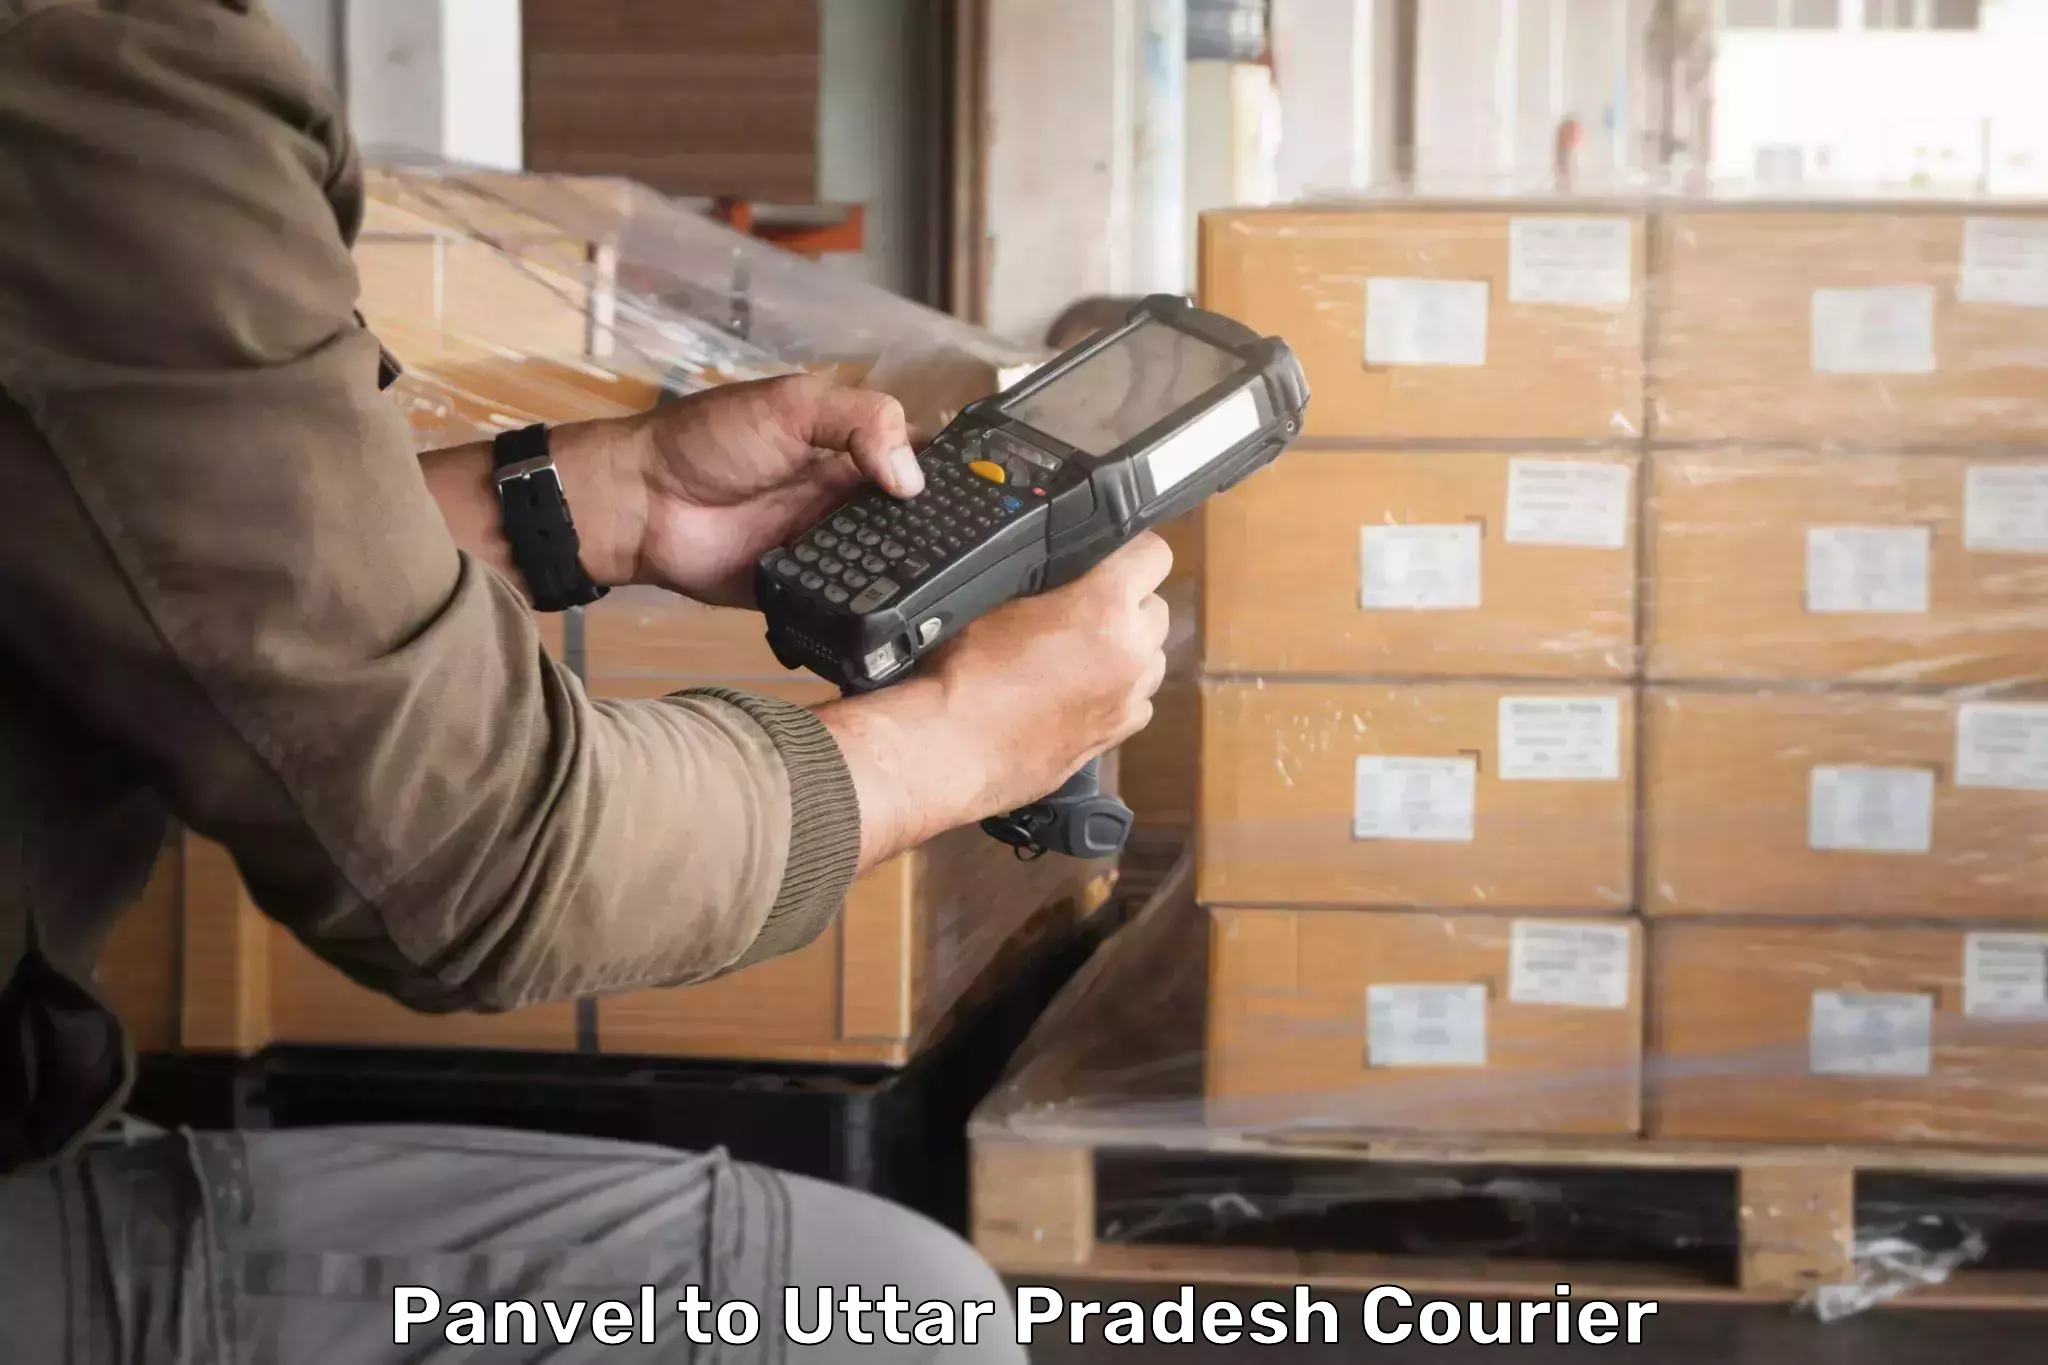 Courier service comparison in Panvel to Koraon